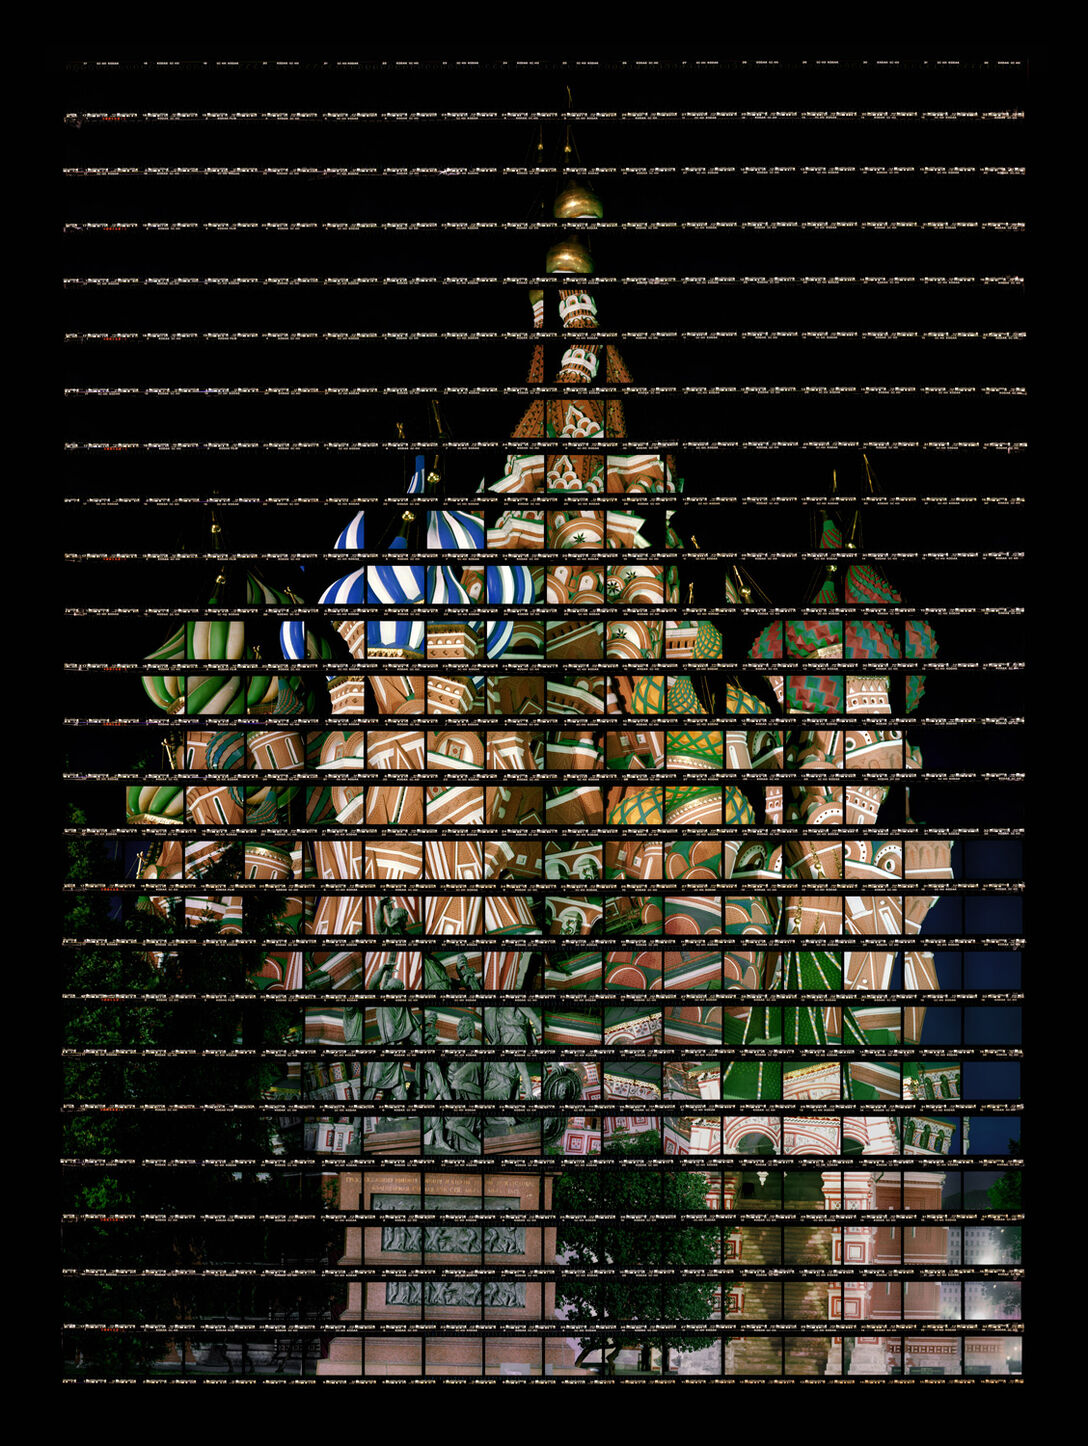 87#04 Moscow, Basilius Cathedral (night), 2014, C-Print, 61 x 83,7 cm, edition 12+3, starting at 2690 Euros / 2990 USD